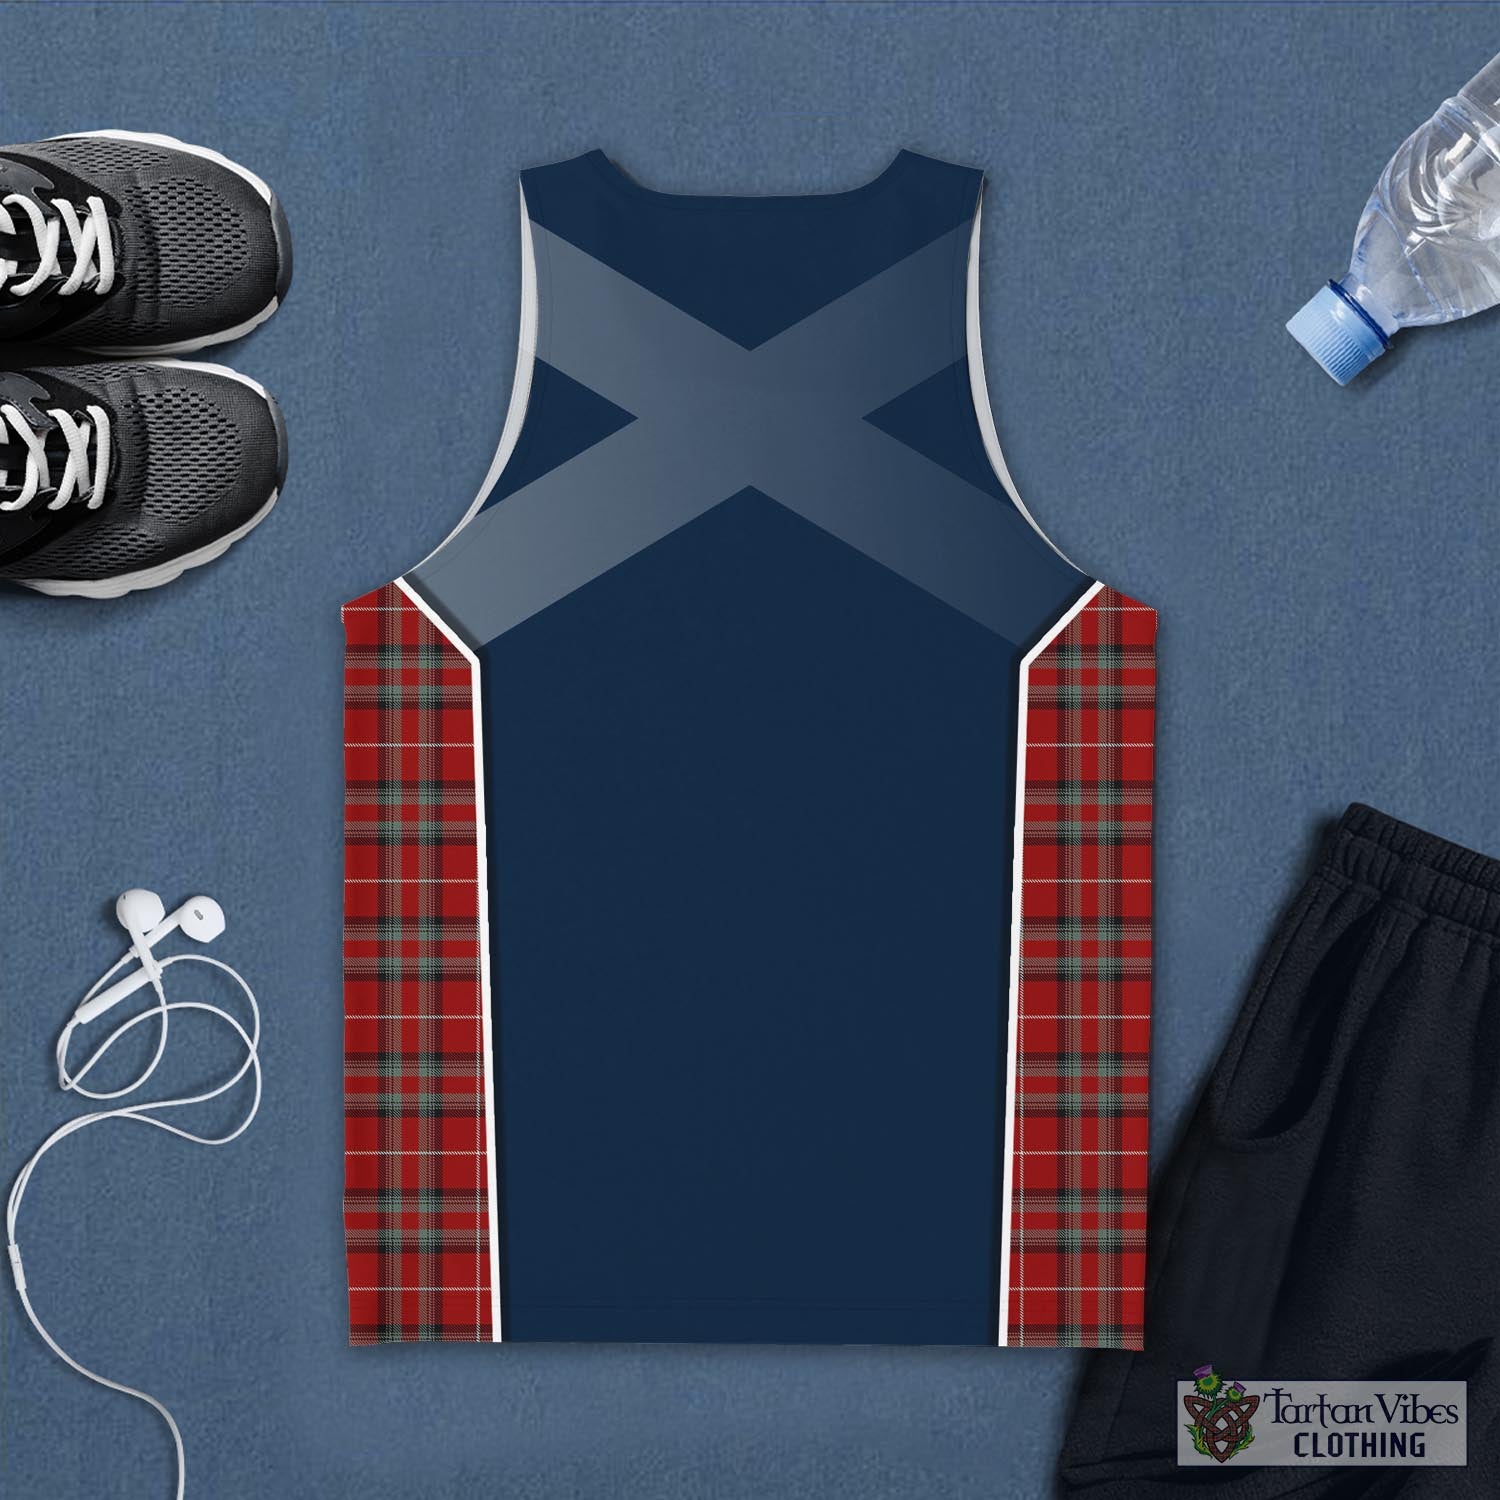 Tartan Vibes Clothing Stuart of Bute Tartan Men's Tanks Top with Family Crest and Scottish Thistle Vibes Sport Style